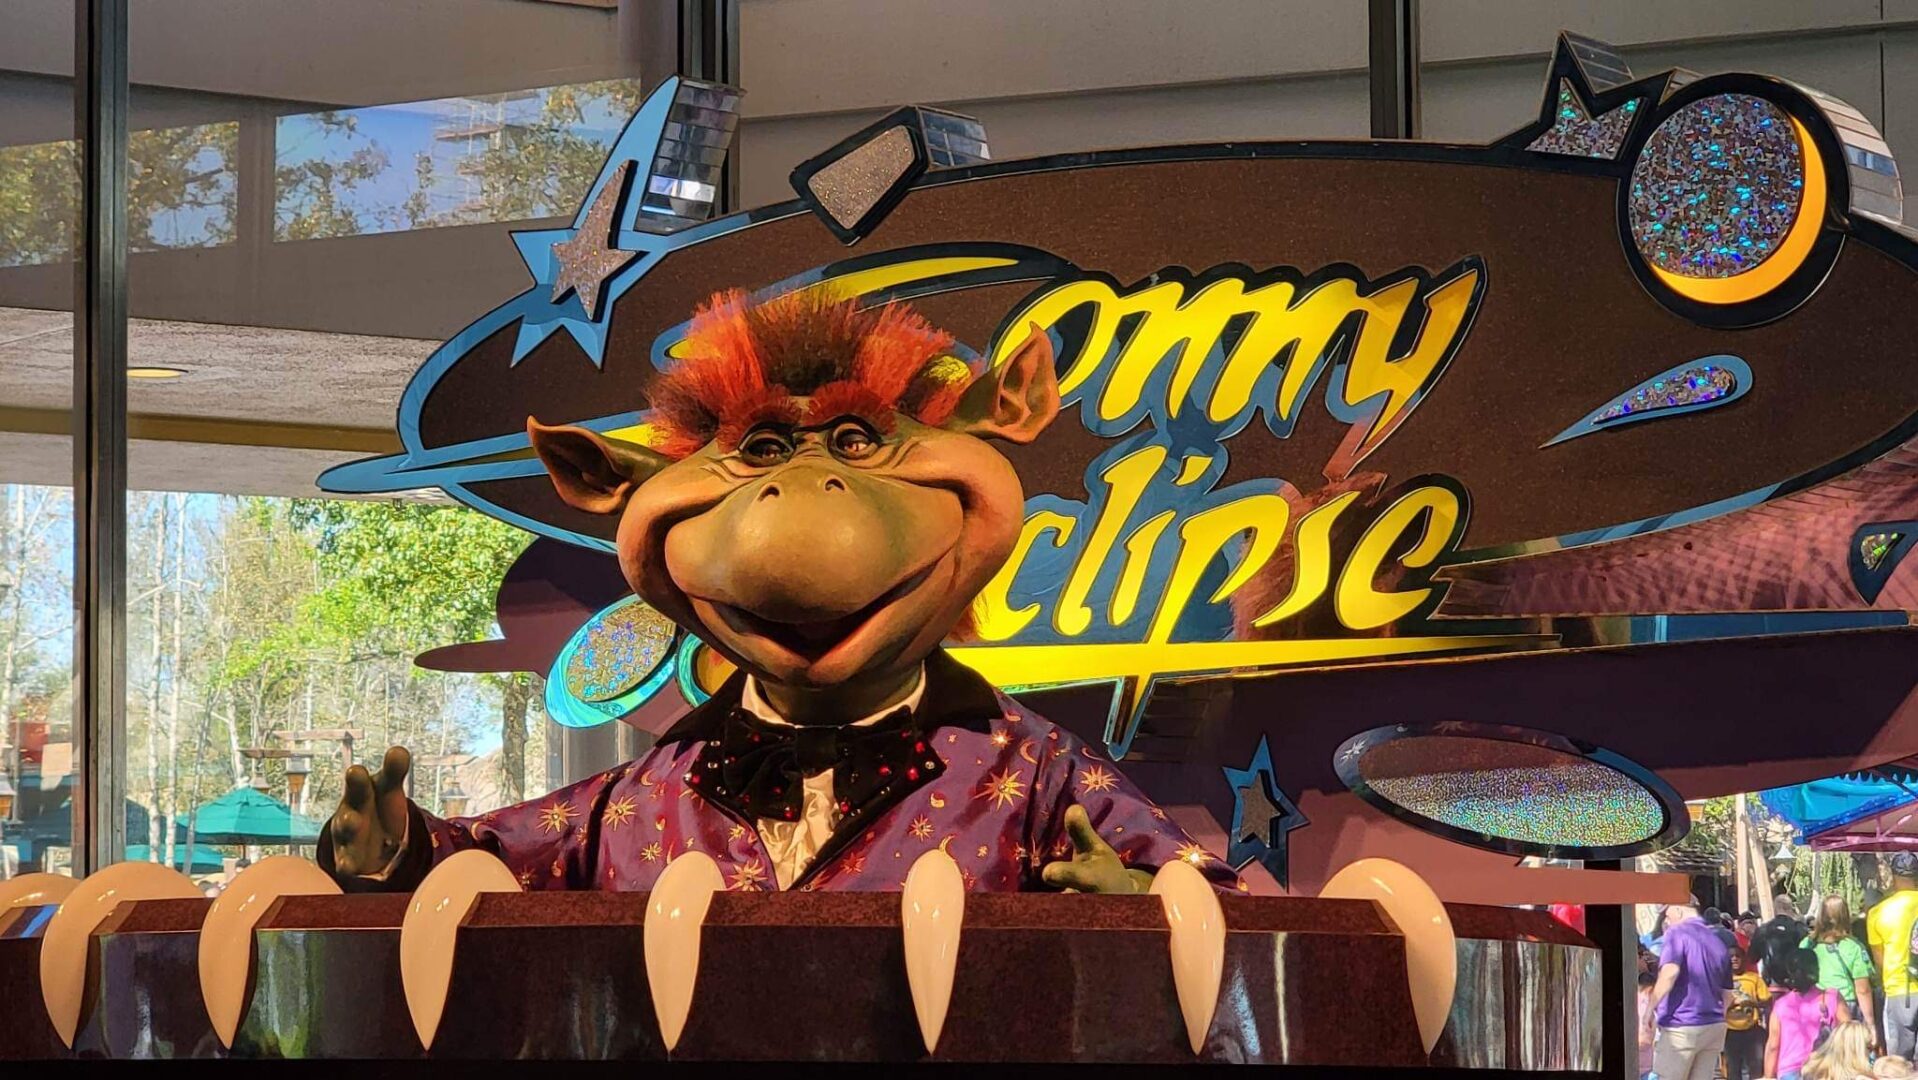 Sonny Eclipse Returns to the Stage in Cosmic Ray’s Starlight Cafe at the Magic Kingdom